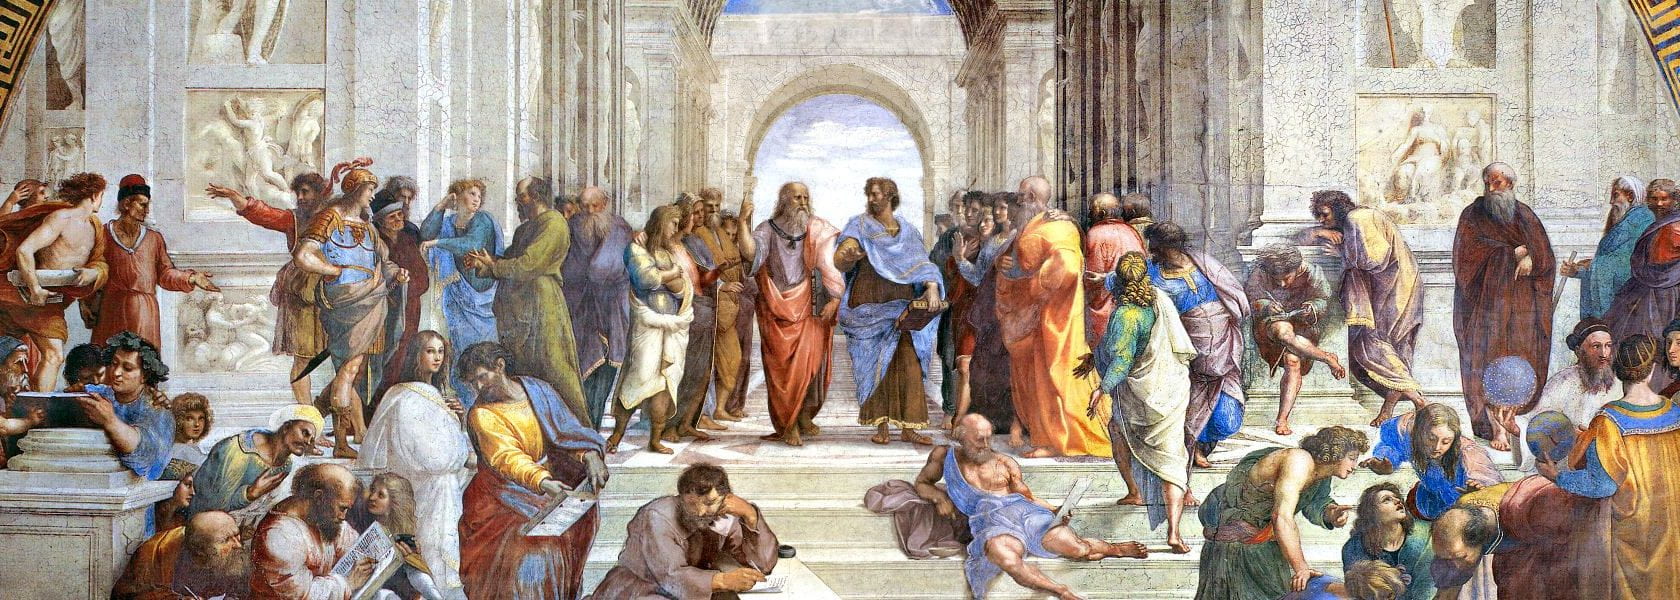 Painting "The School of Athens" by Raphael (Apostolic Palace, Vatican)